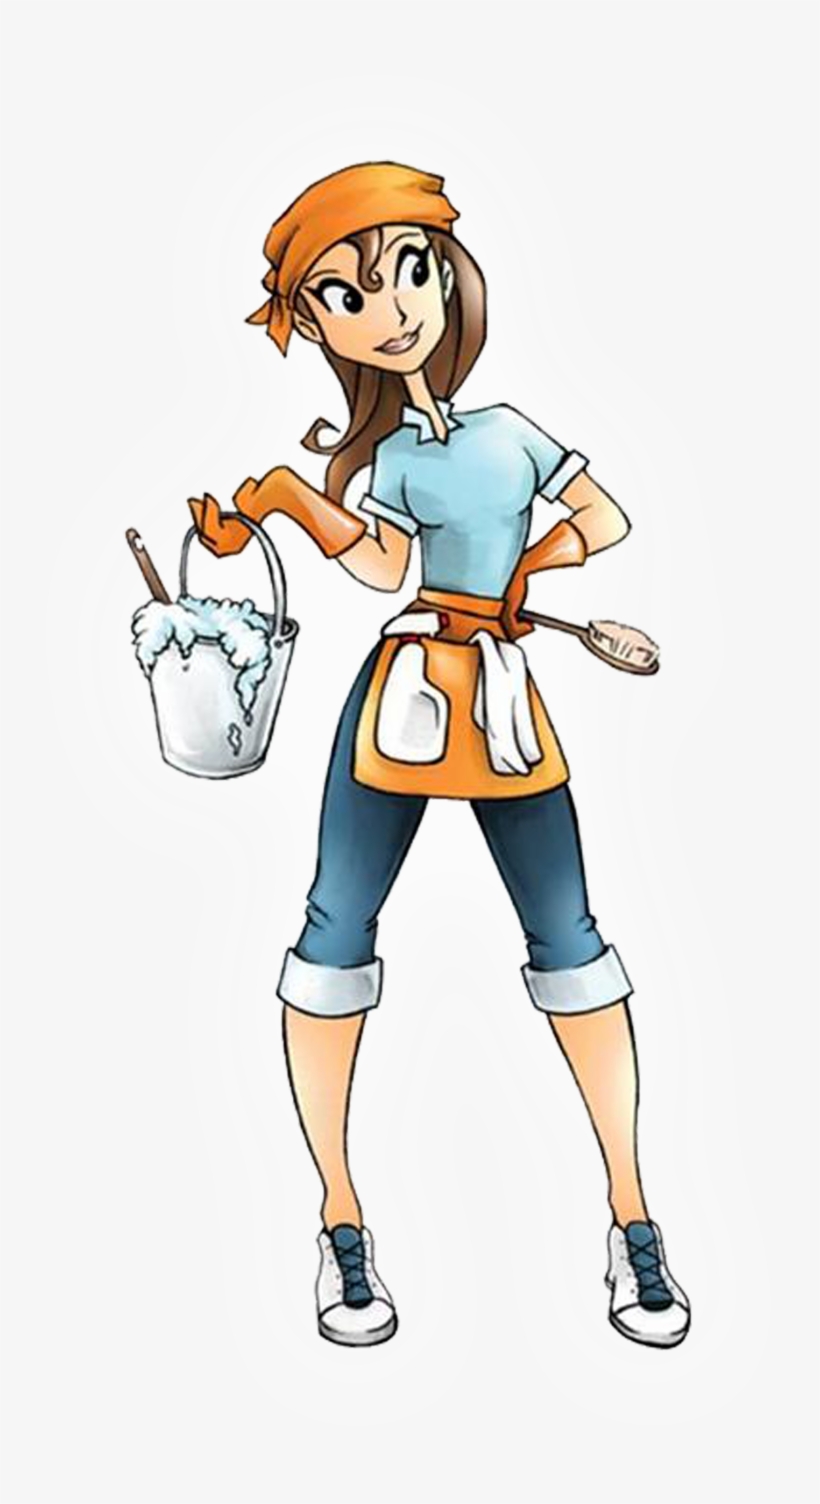 Cleaning Lady Clip Art - Cleaning Lady Clipart, transparent png #556035